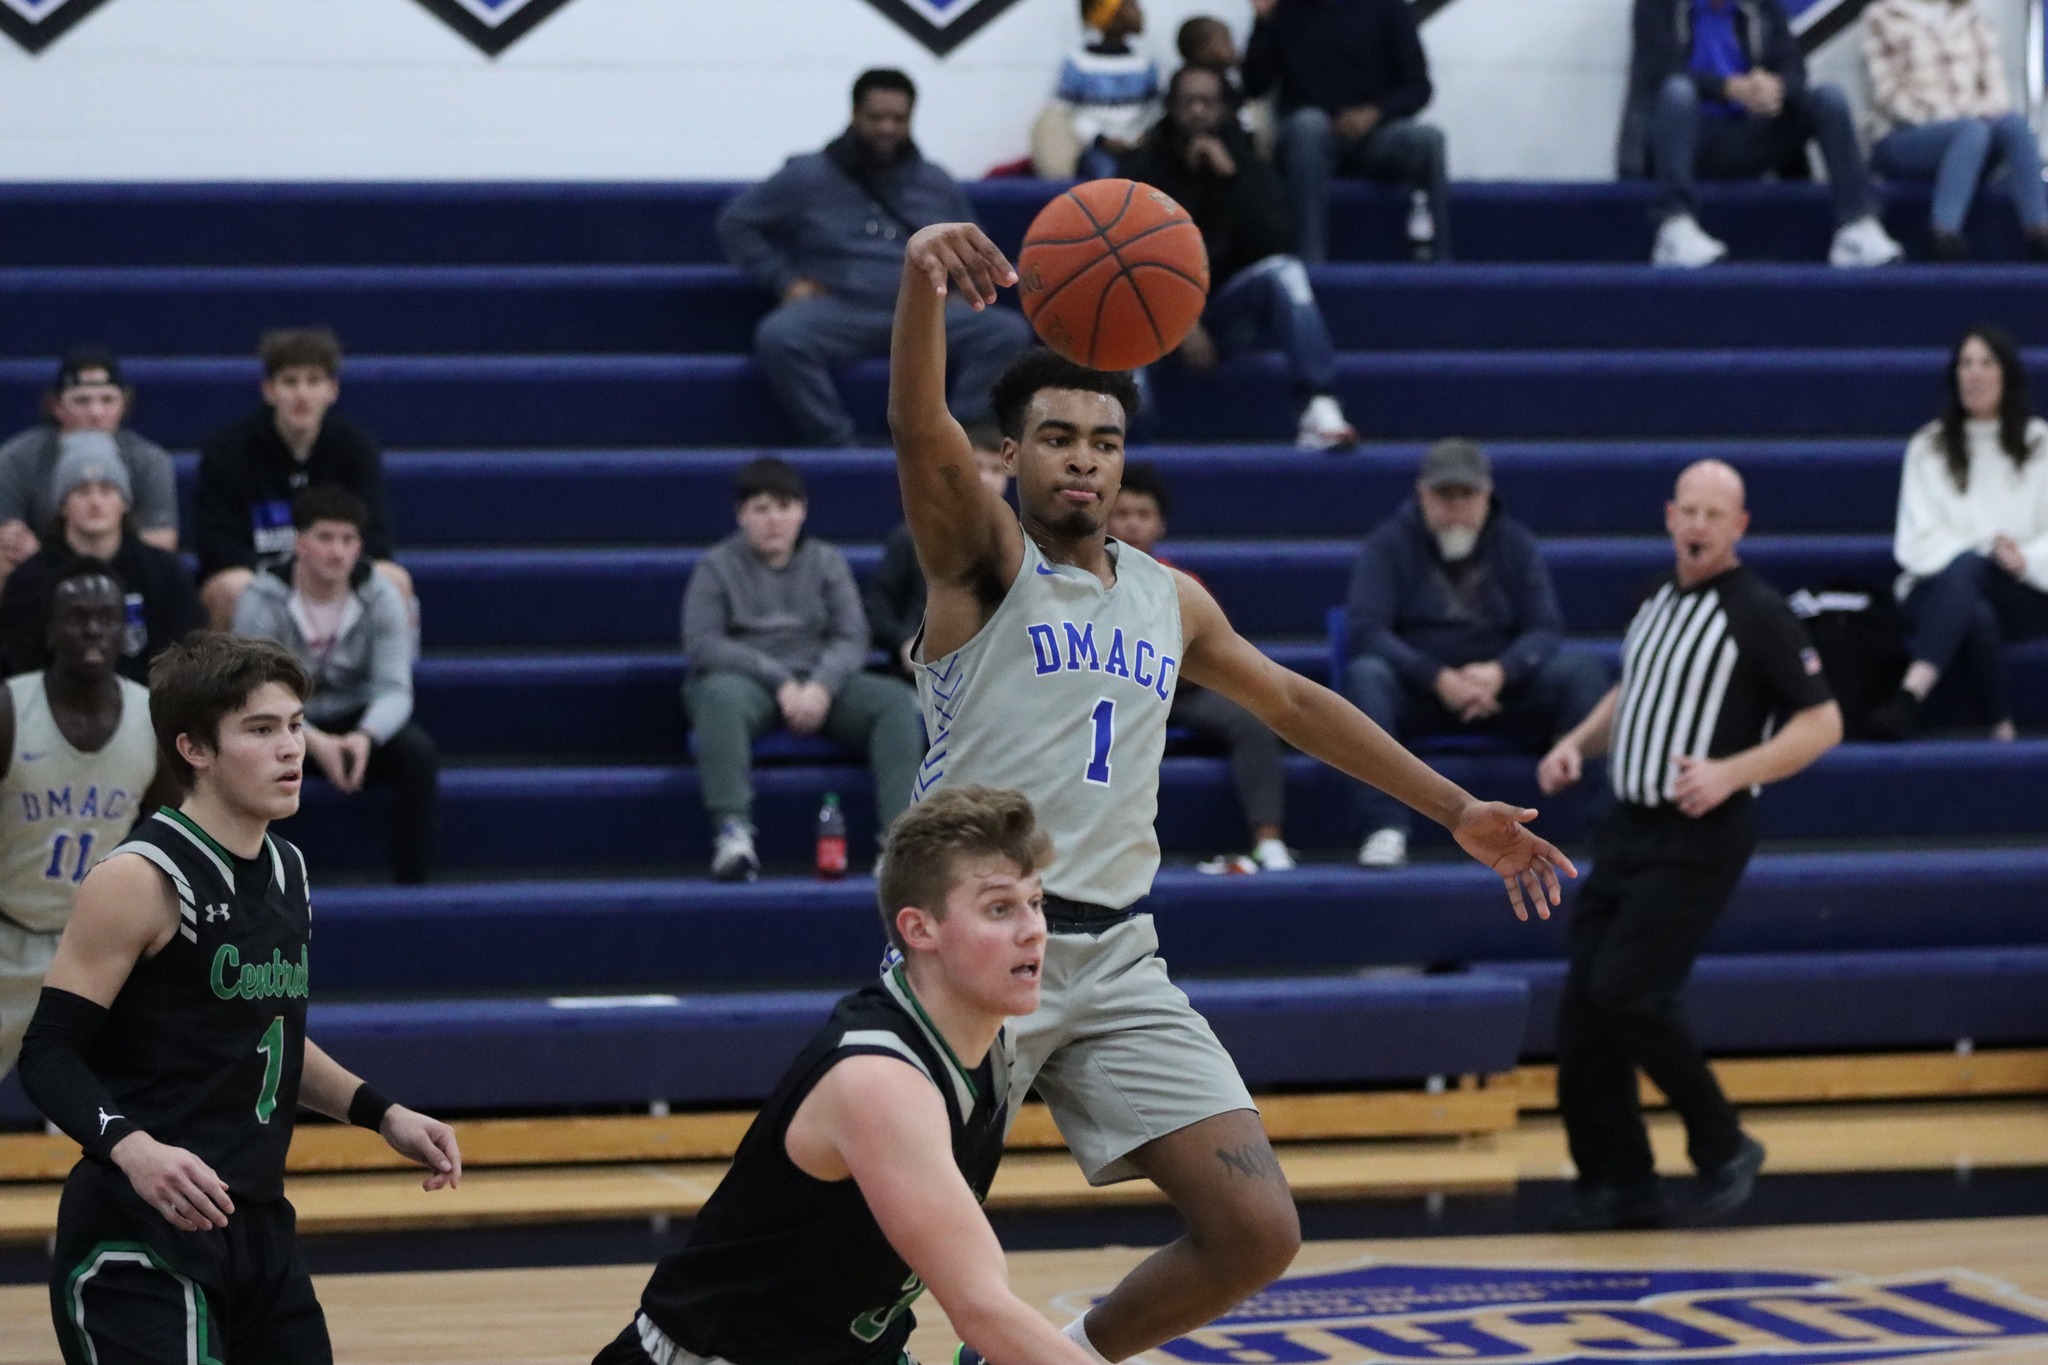 DMACC men's basketball team drops double-overtime decision to IWCC, 86-83